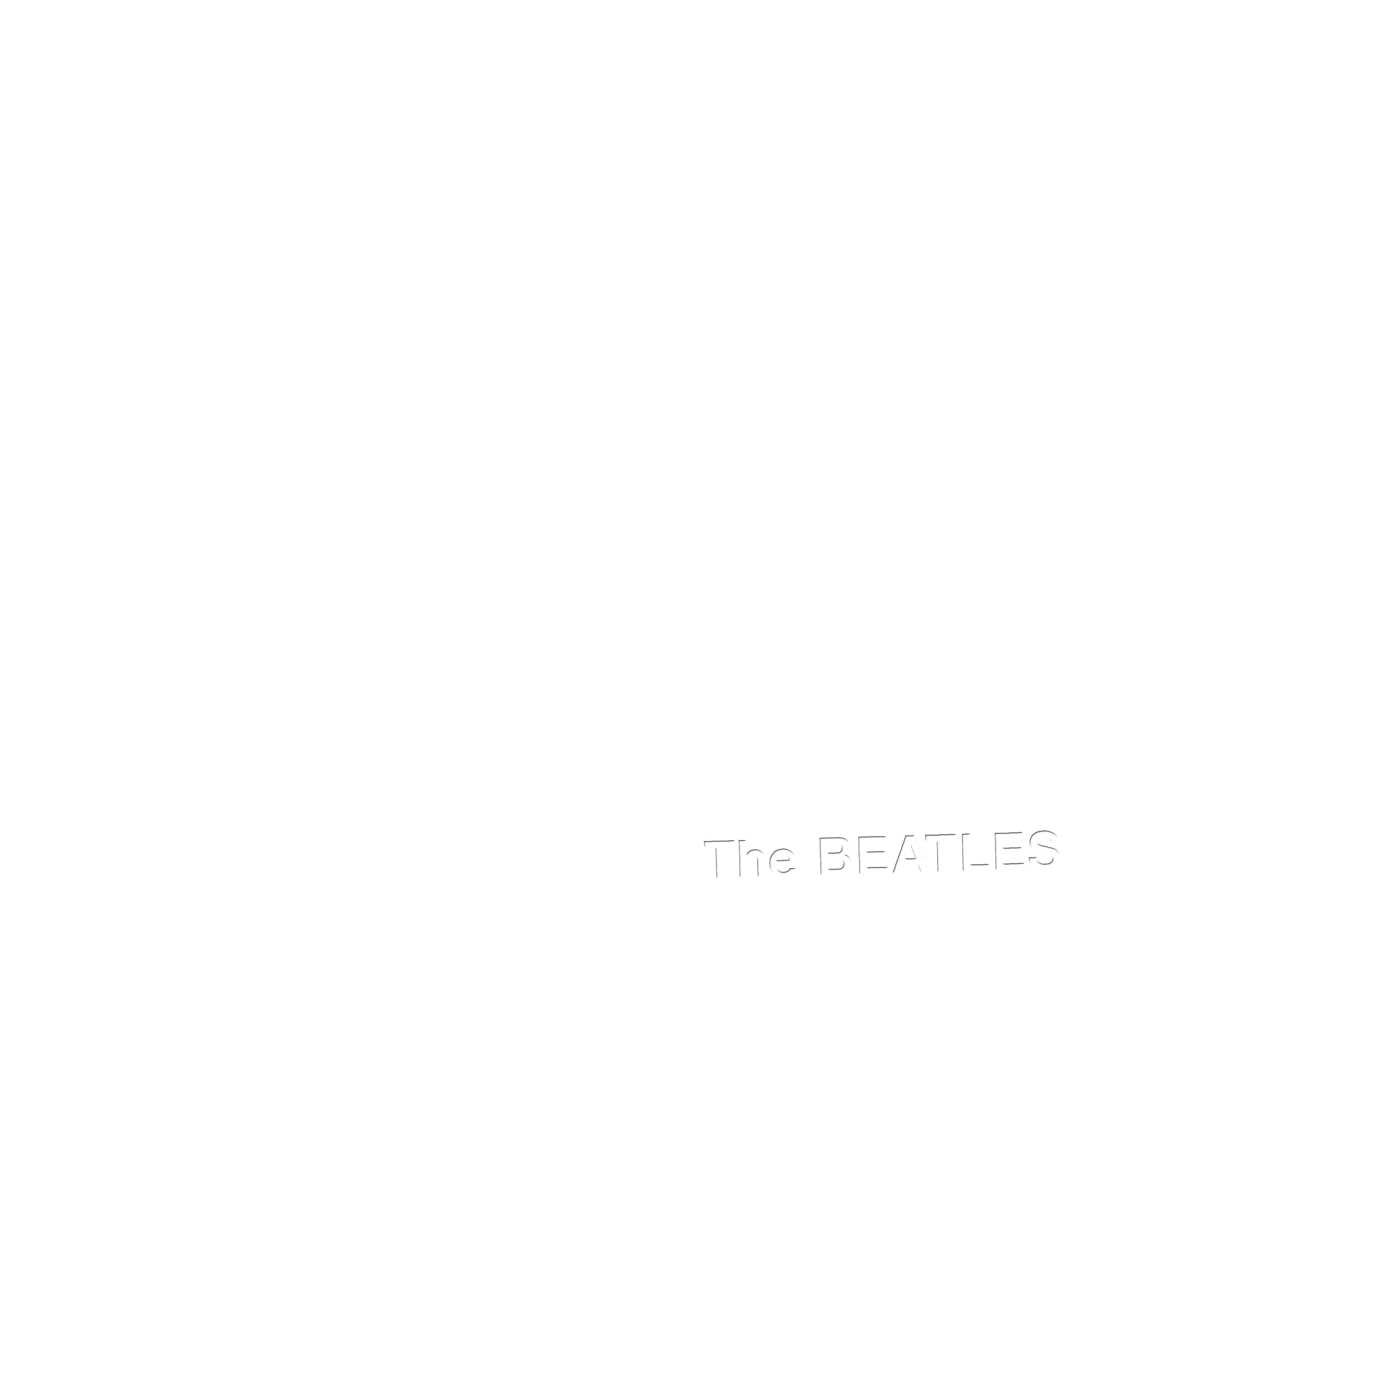 The Beatles (50th Anniversary 6CD + Blu-ray Audio Super Deluxe Edition)